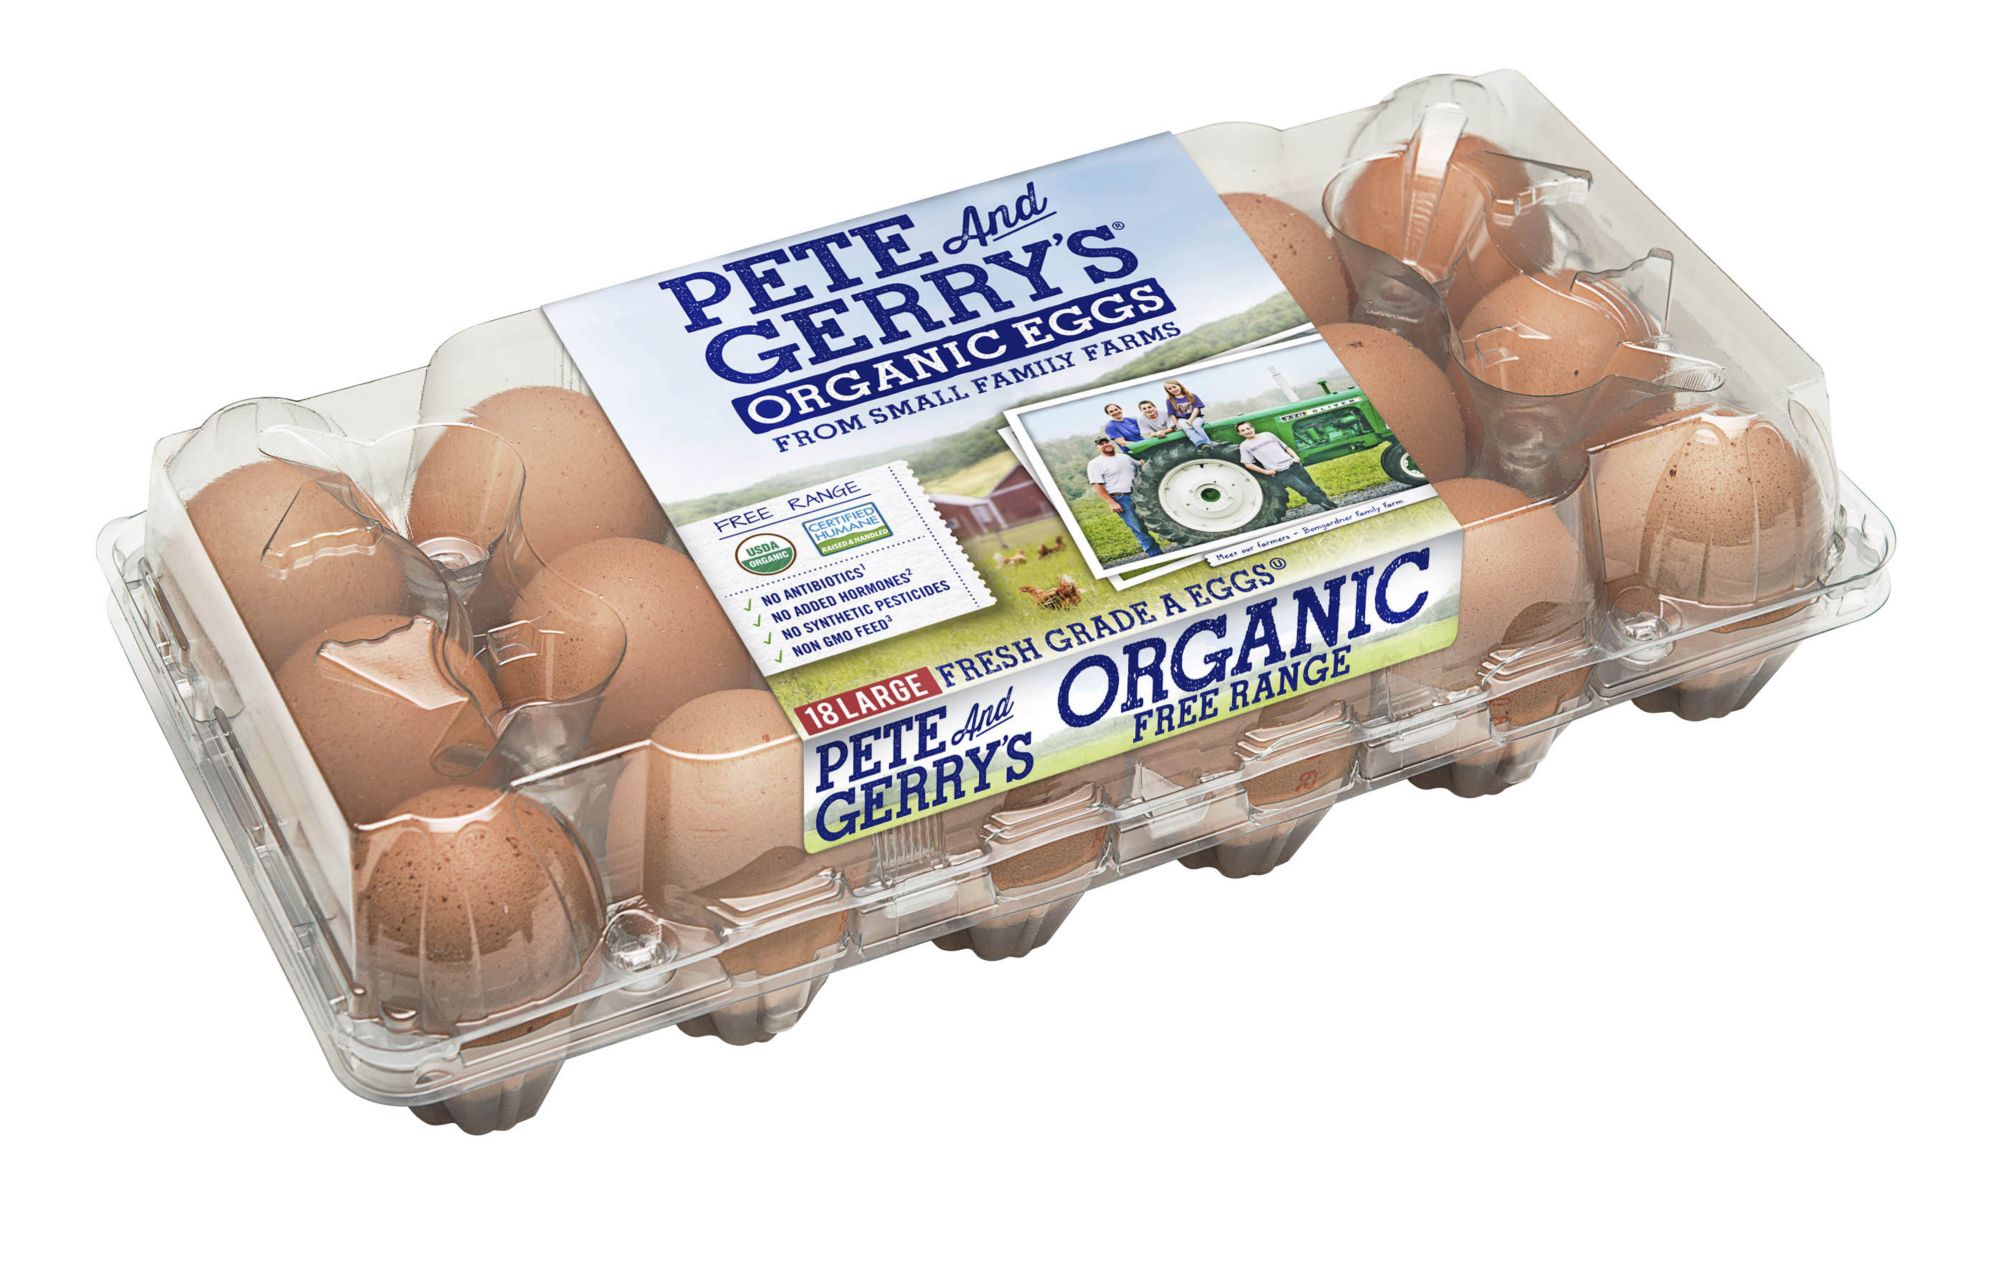 Pete and Gerry's and Wellsley Farms Organic Eggs, 18 ct.